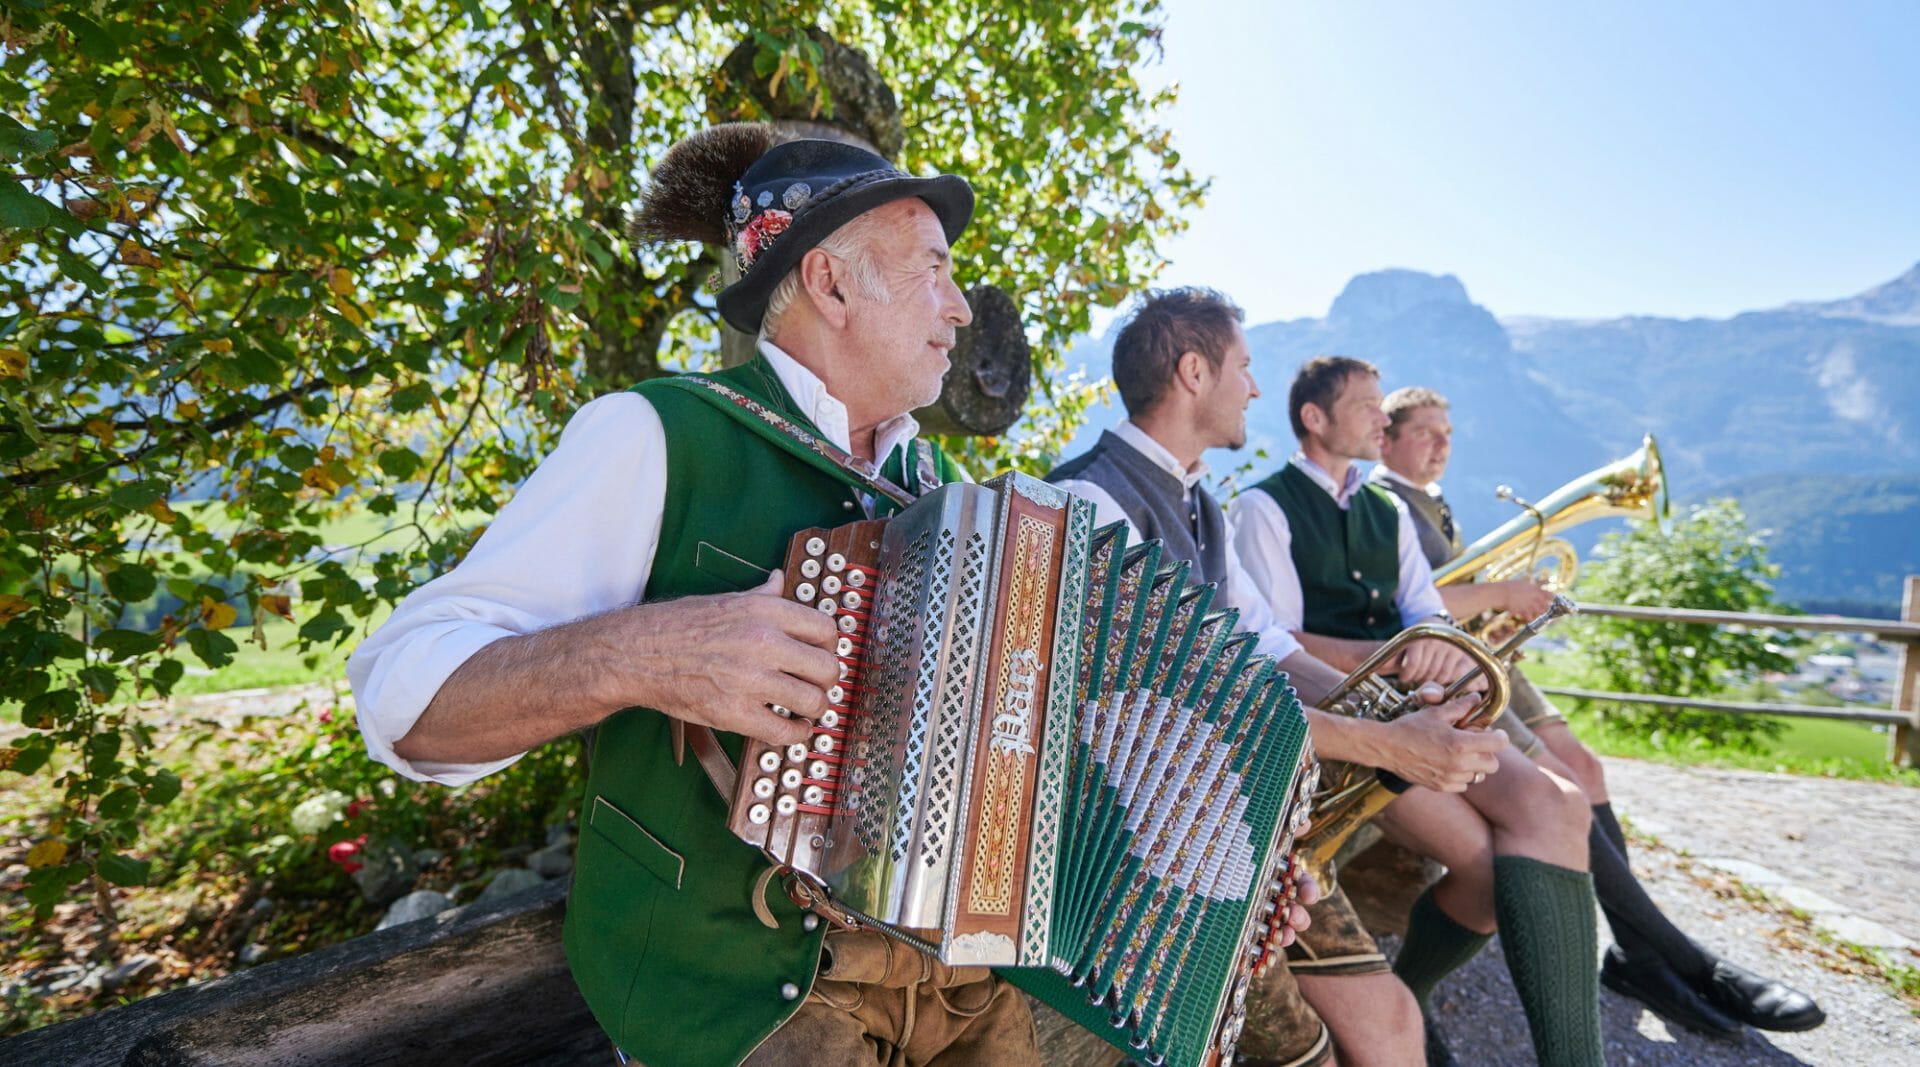 Culture in the mountains: music, dance and traditions transform the ...